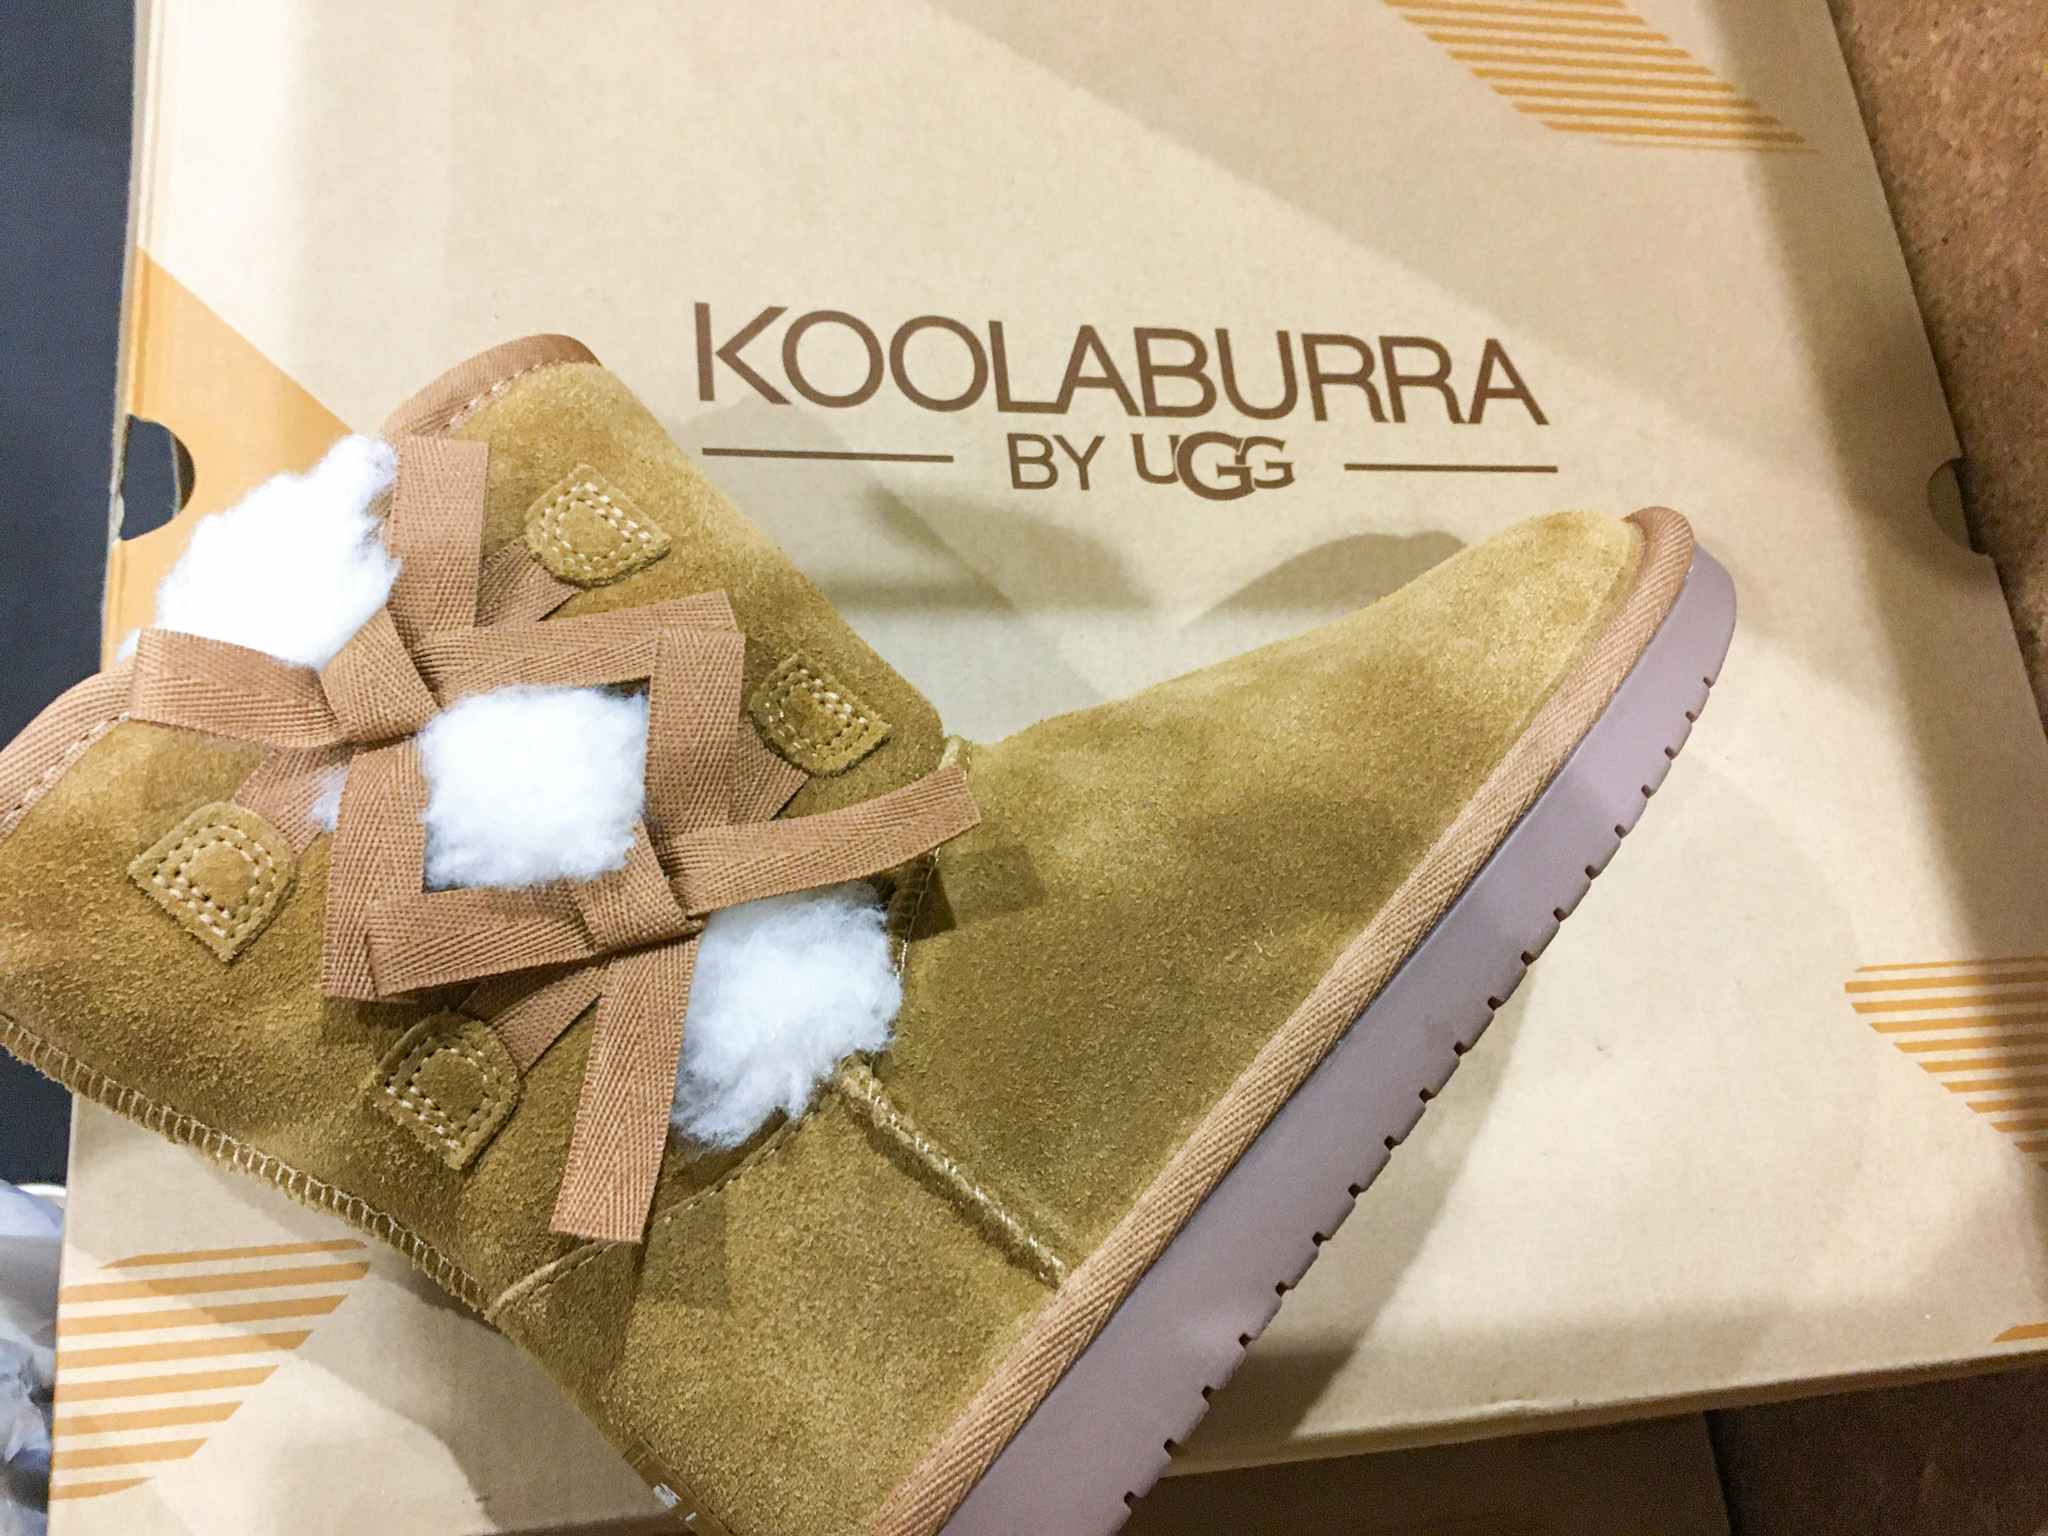 Koolaburra by Ugg Boots, as Low as $29 Shipped at QVC